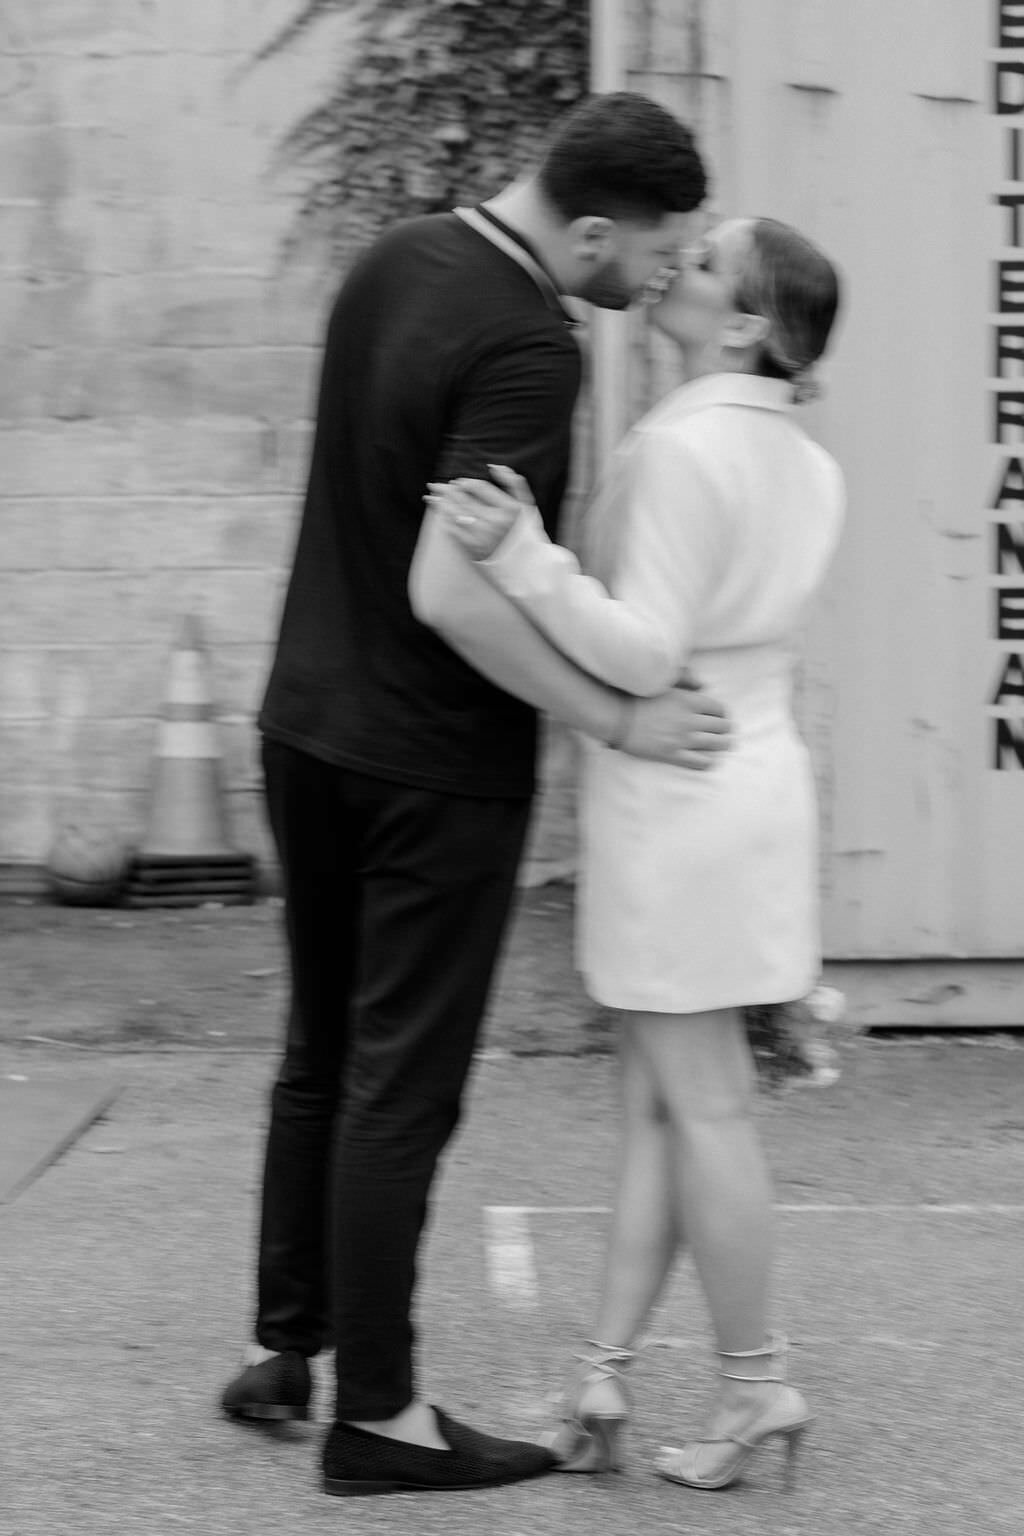 blurred black and white photo of a bride and groom kissing